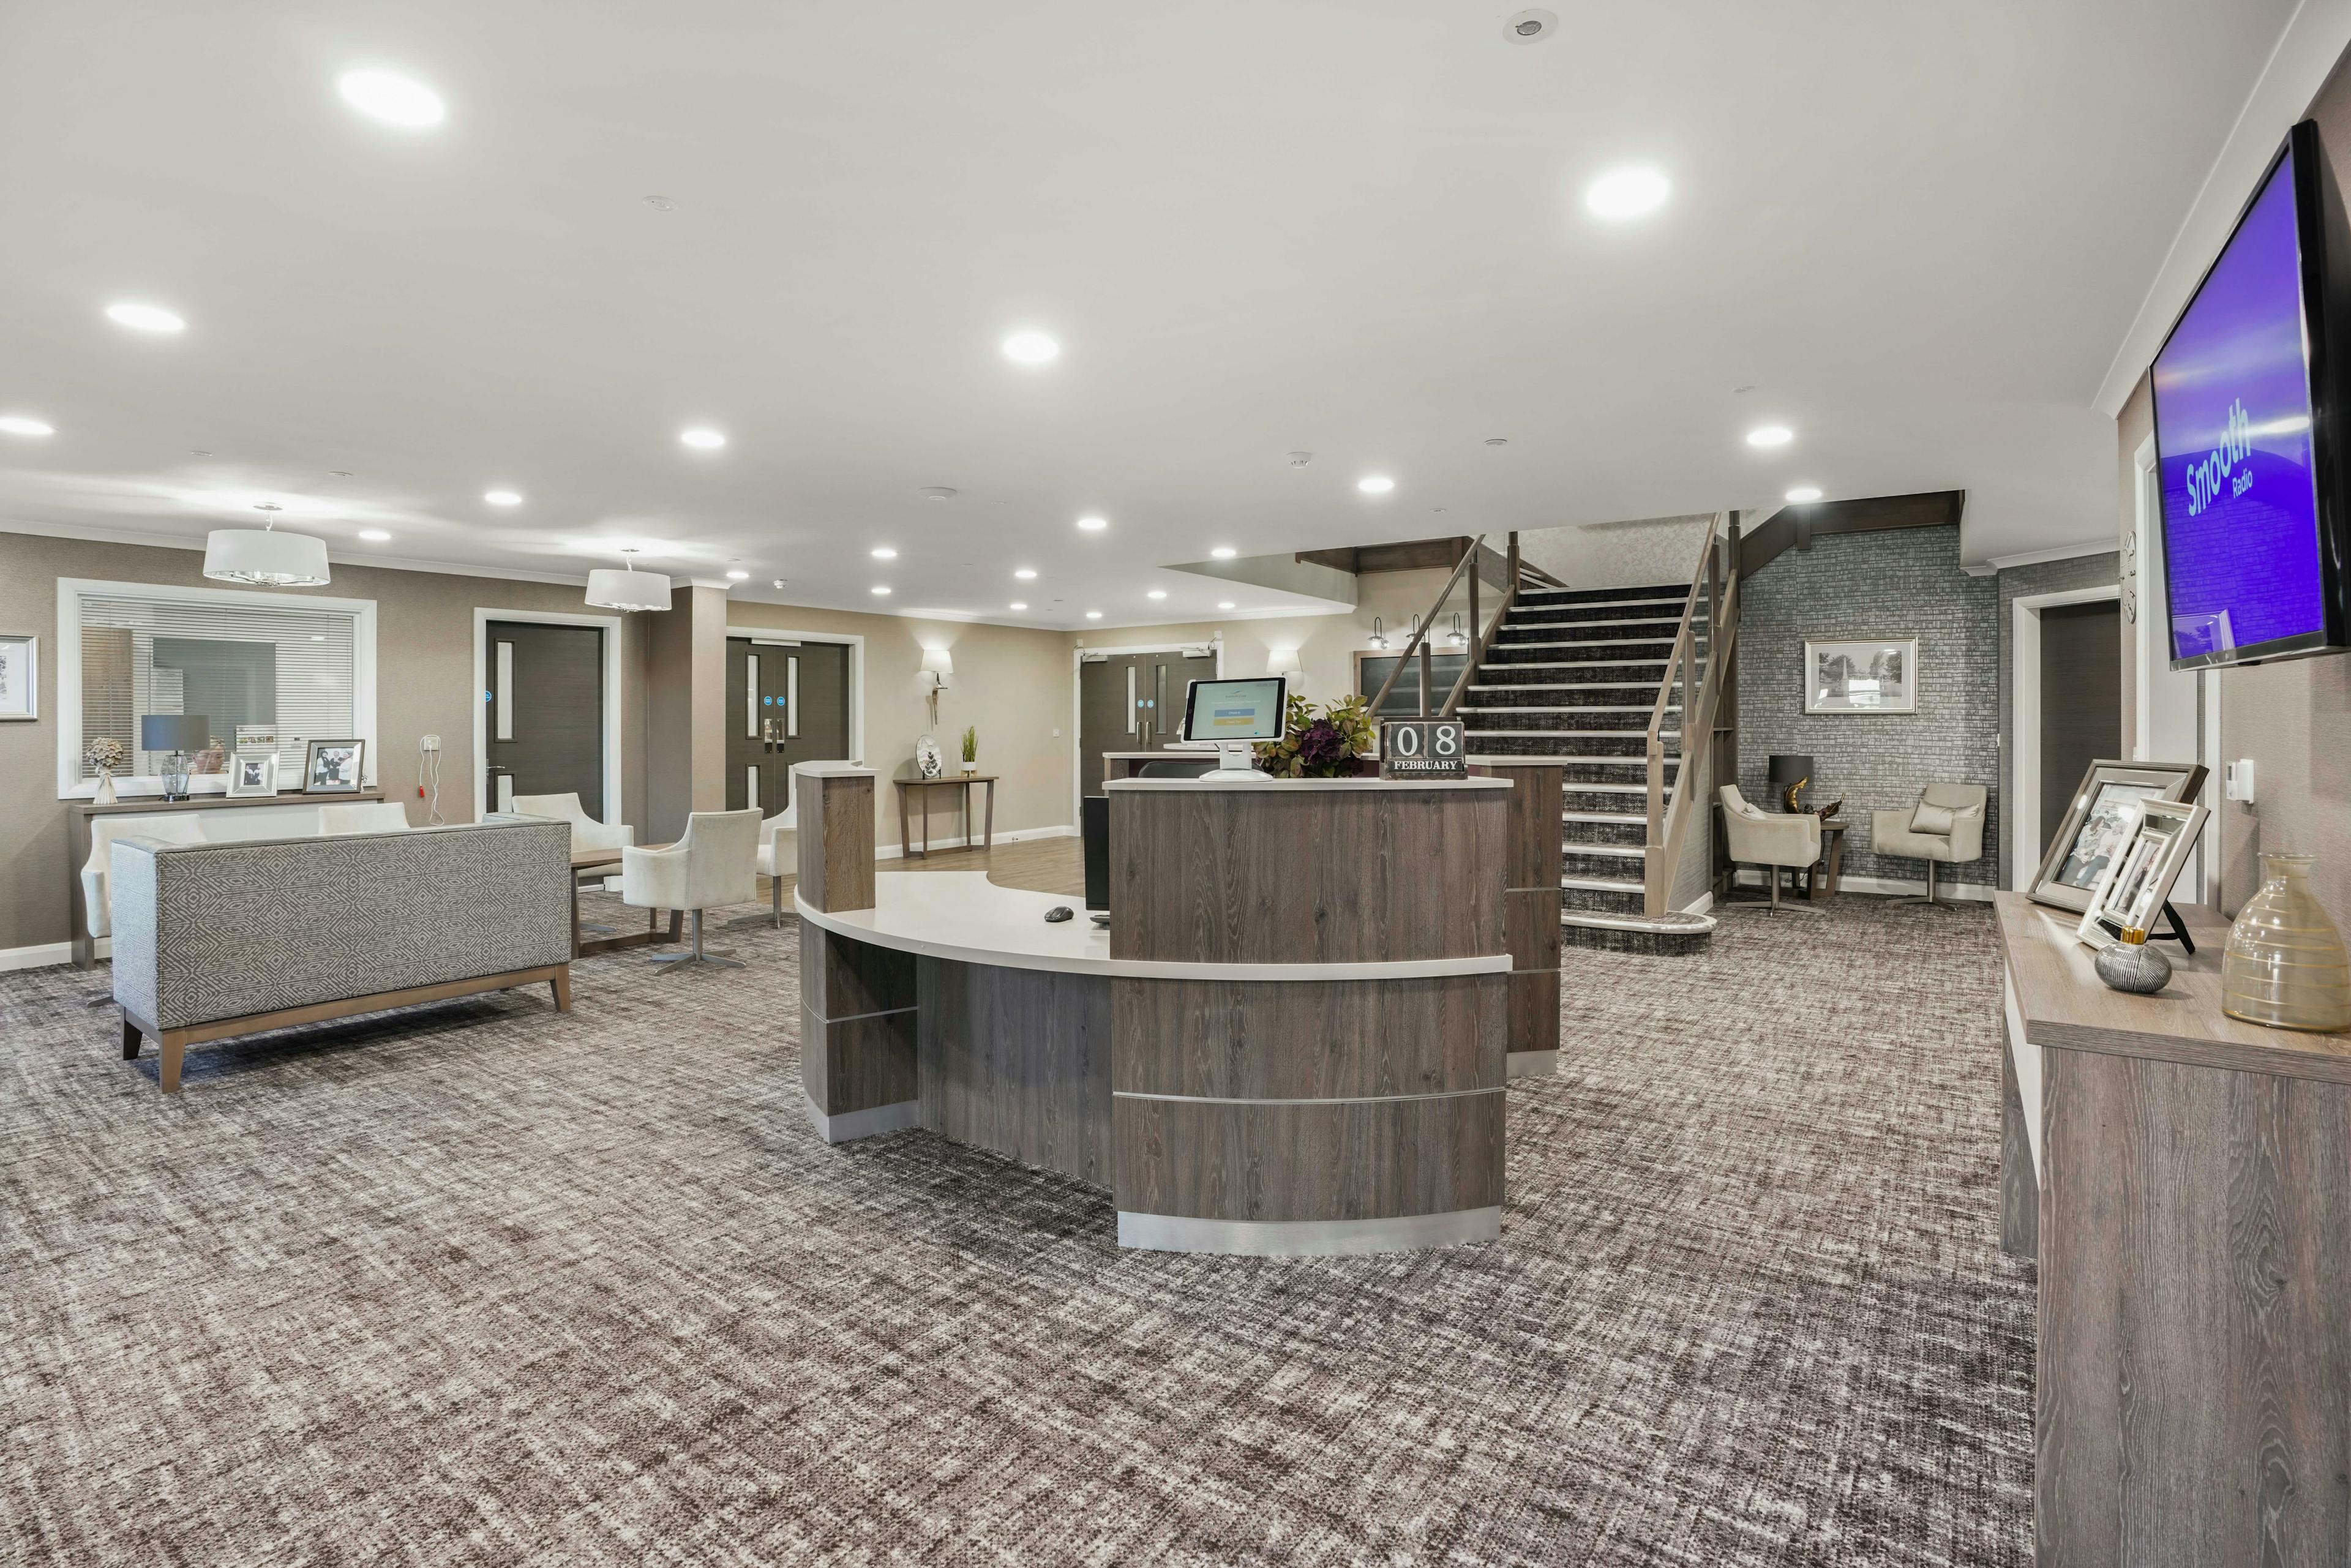 Reception of Meadows Park care home in Louth, Lincolnshire